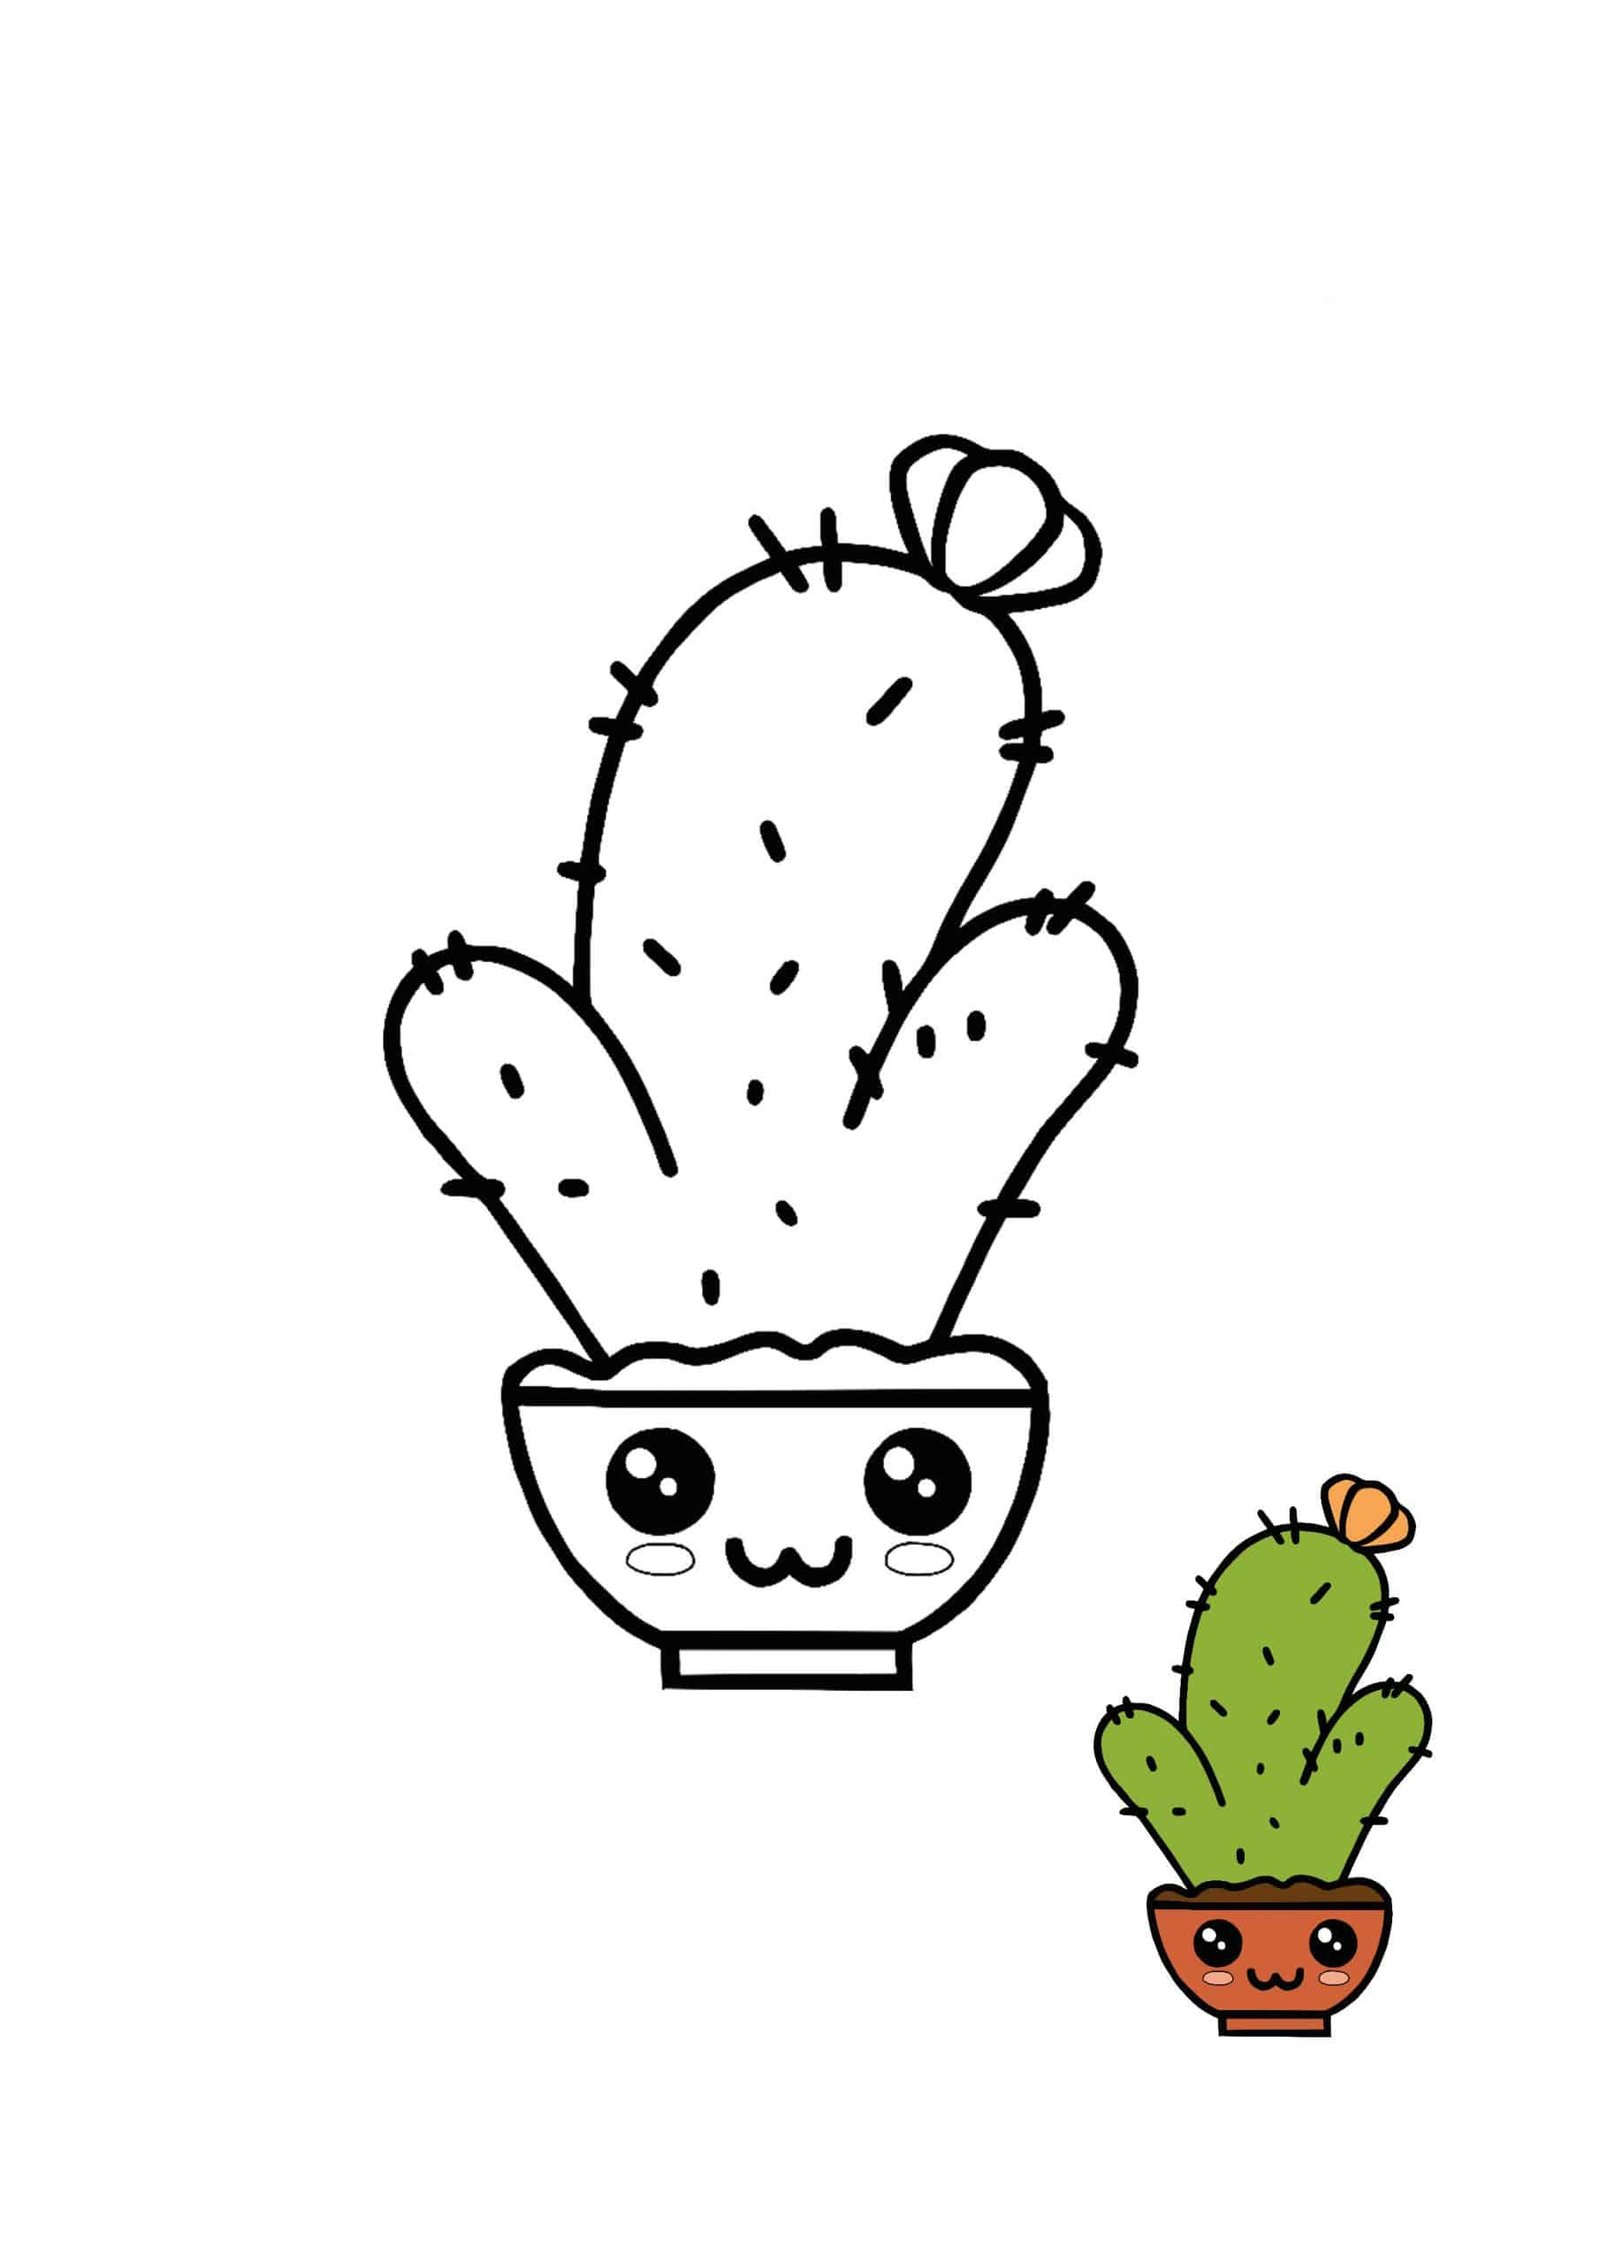 Kawaii Cactus coloring page with sample . How to color cactus?